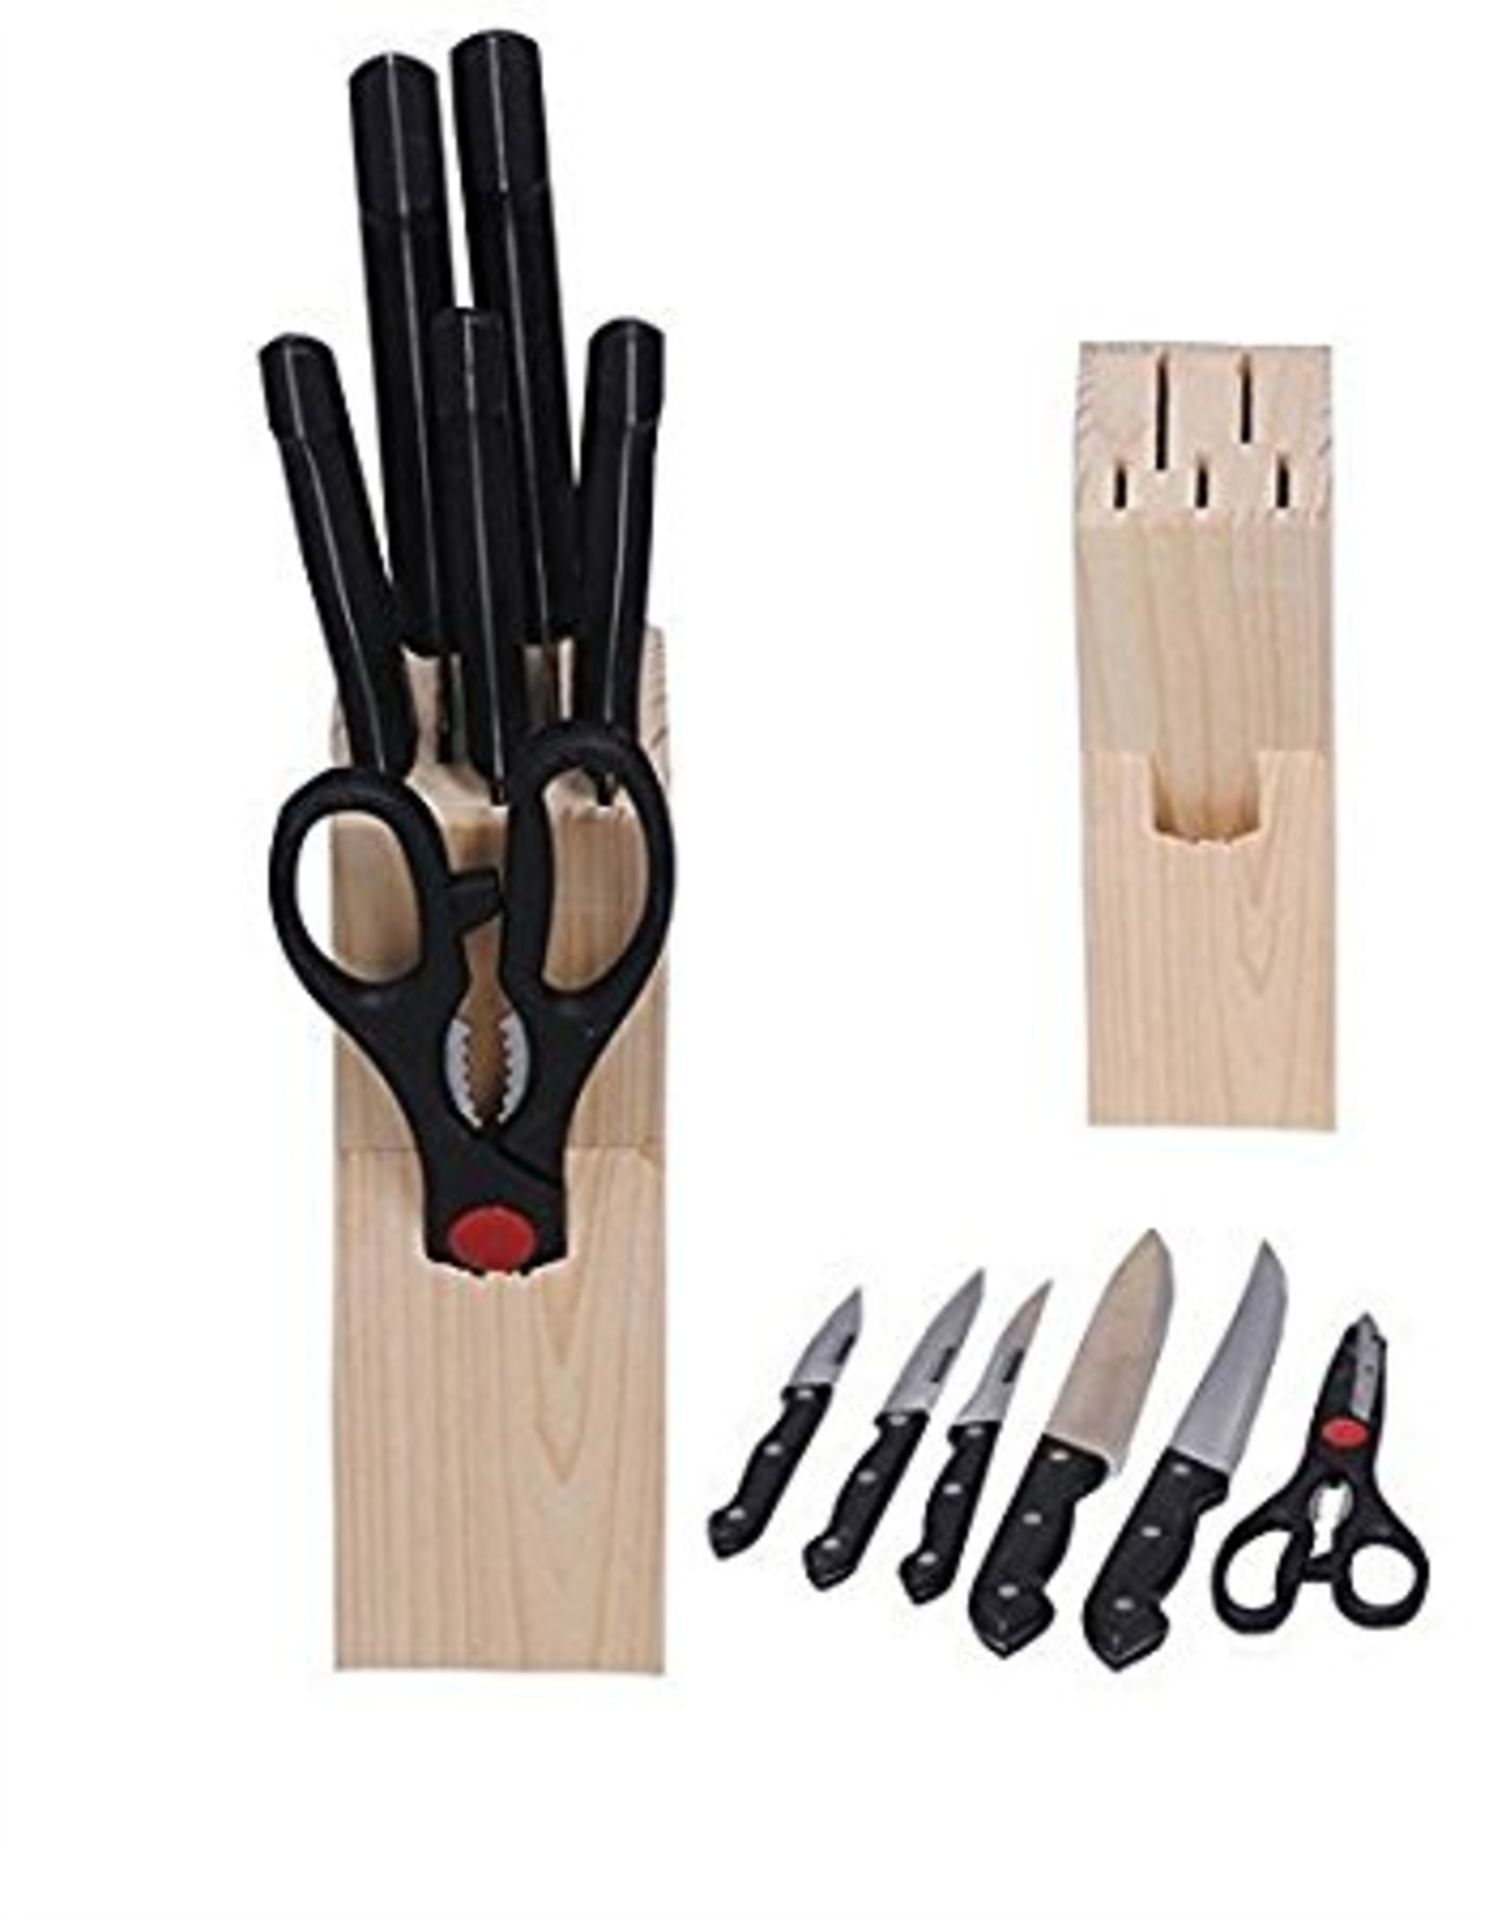 V Brand New 7 Piece Stainless Steel Knife Set With Wooden Block - Includes - Paring Knife - All